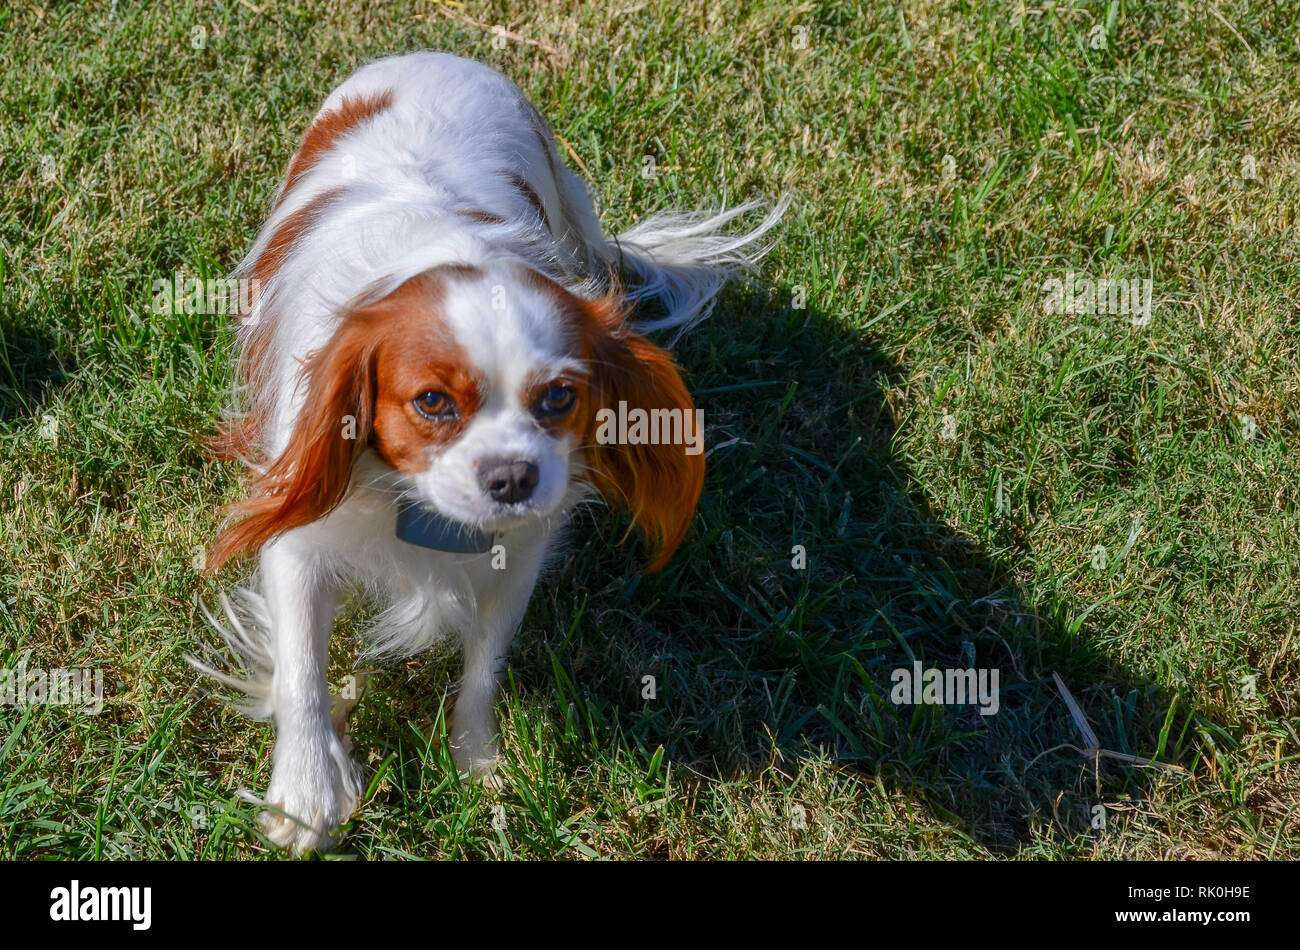 A Cavalier King Charles Spaniel romping on the grass Stock Photo